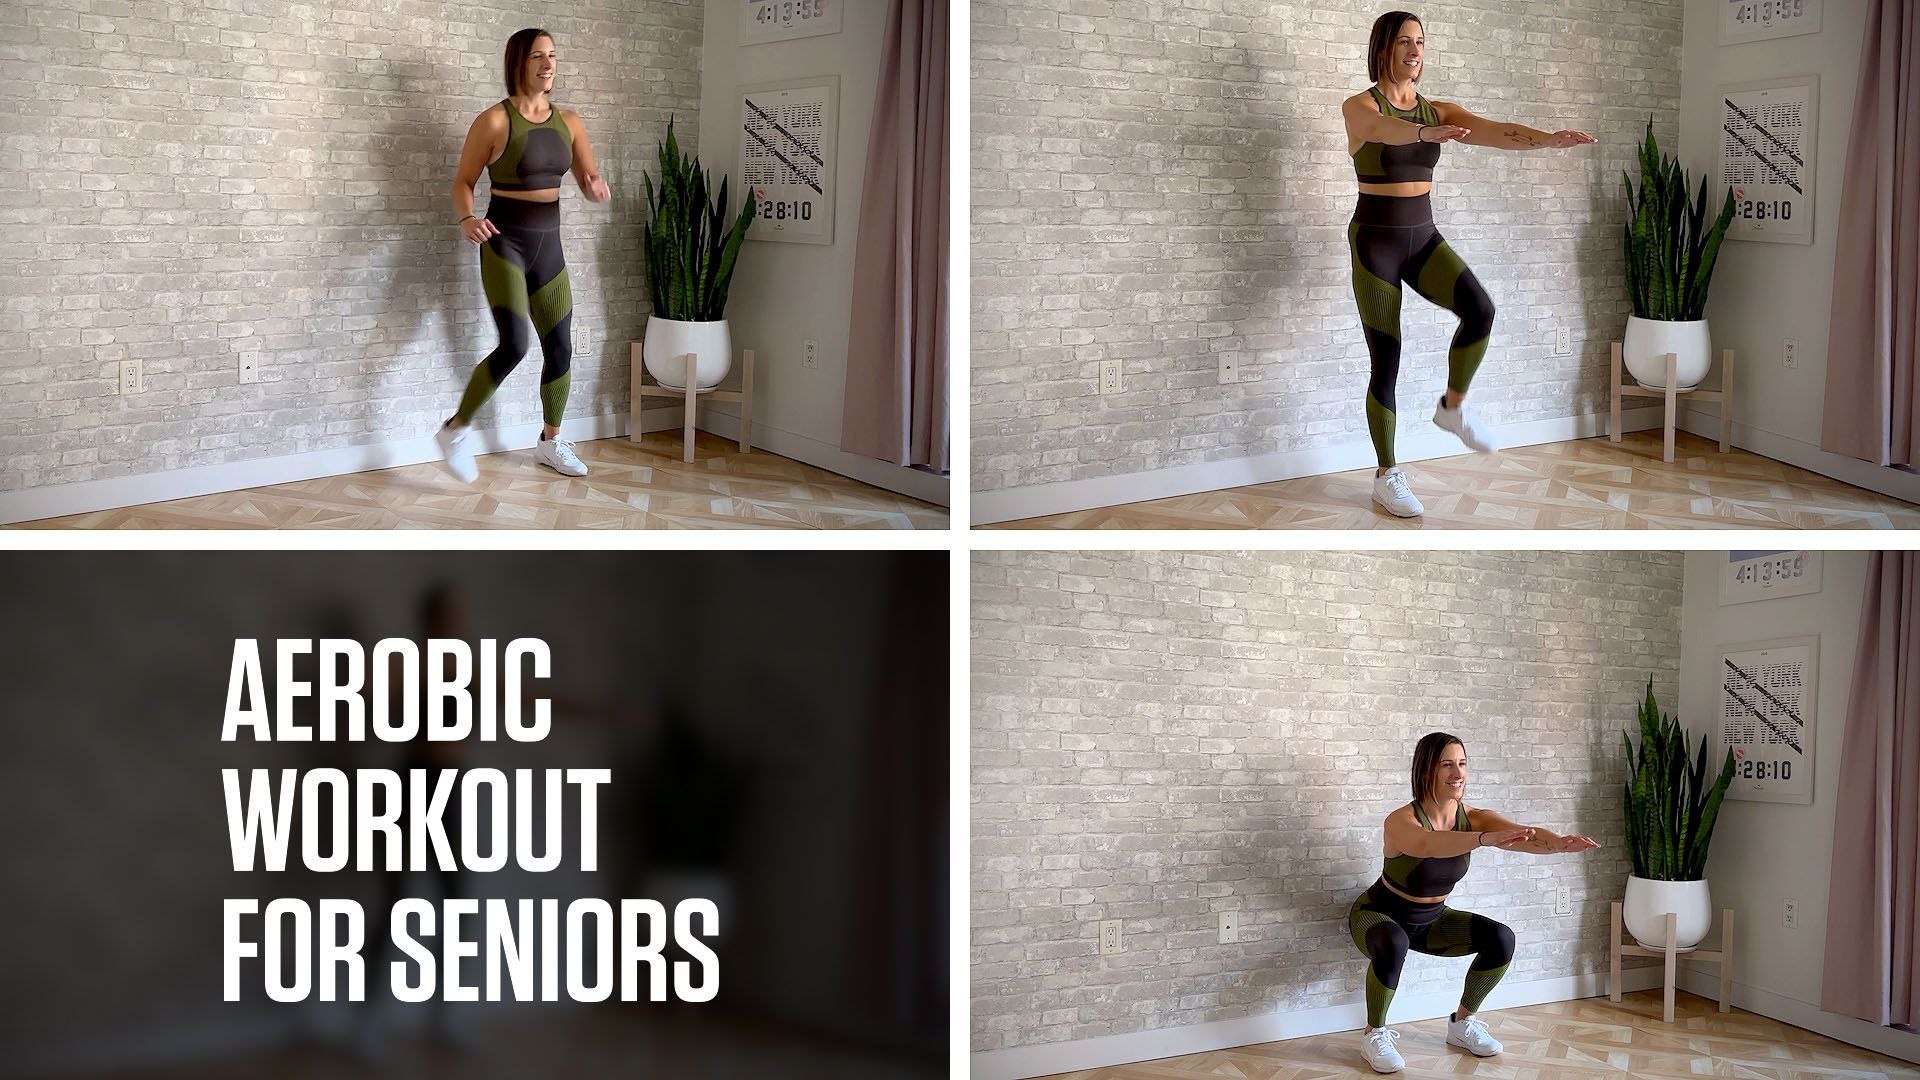 10 Min Chair Workout for Seniors - HASfit Seated Exercise for